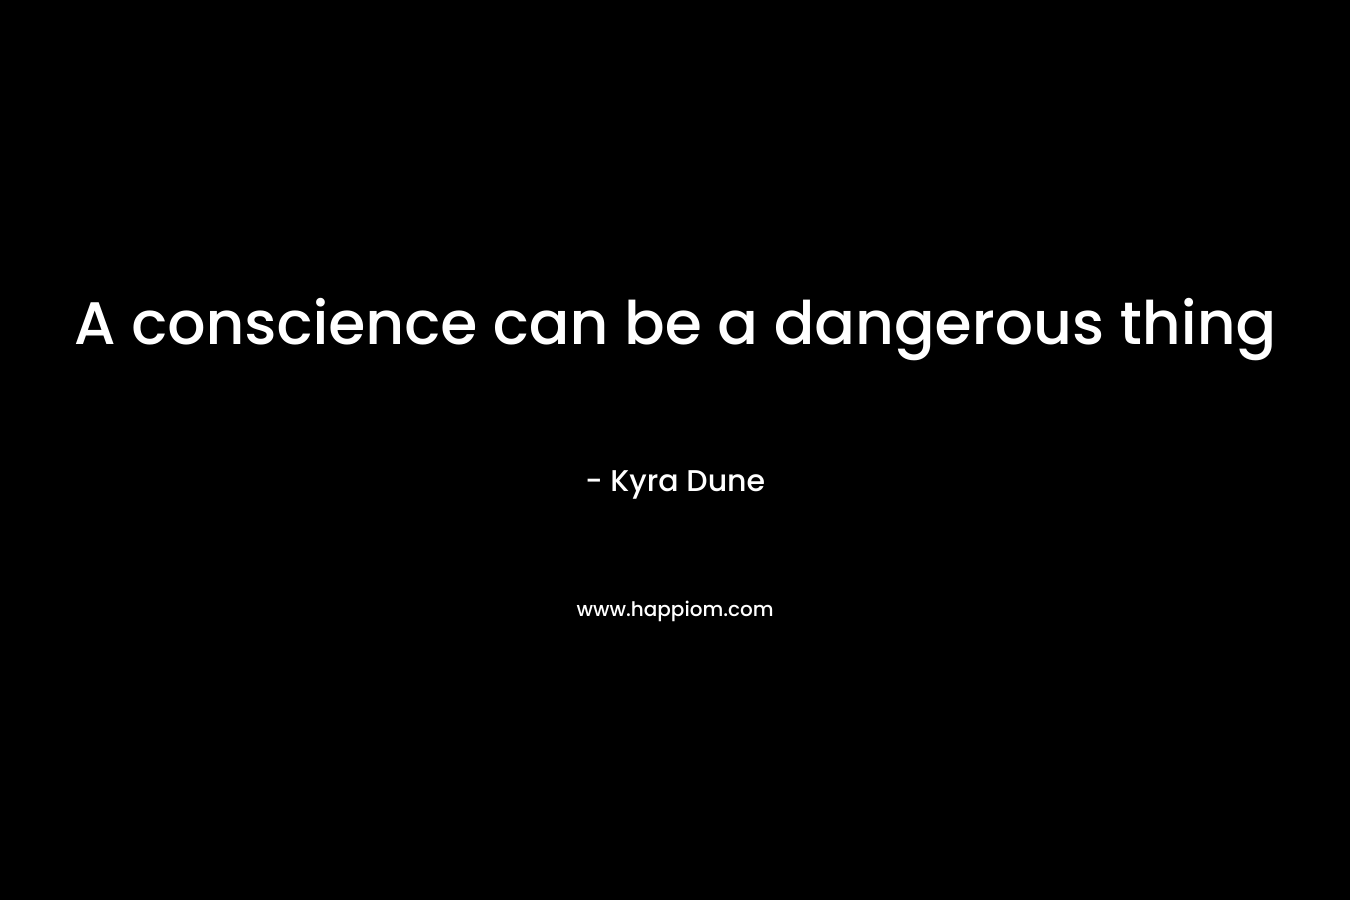 A conscience can be a dangerous thing